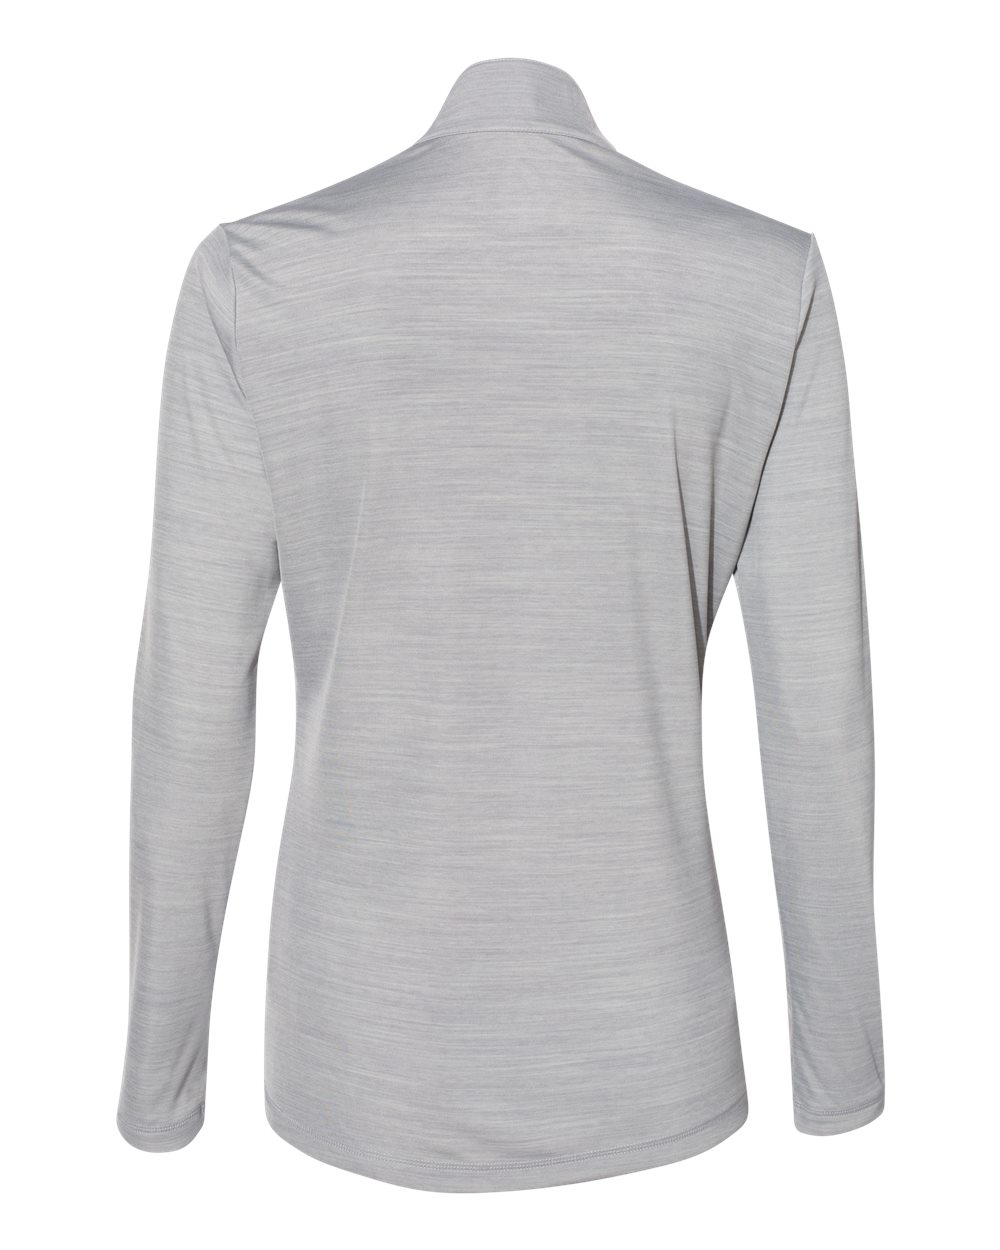 click to view Mid Grey Melange